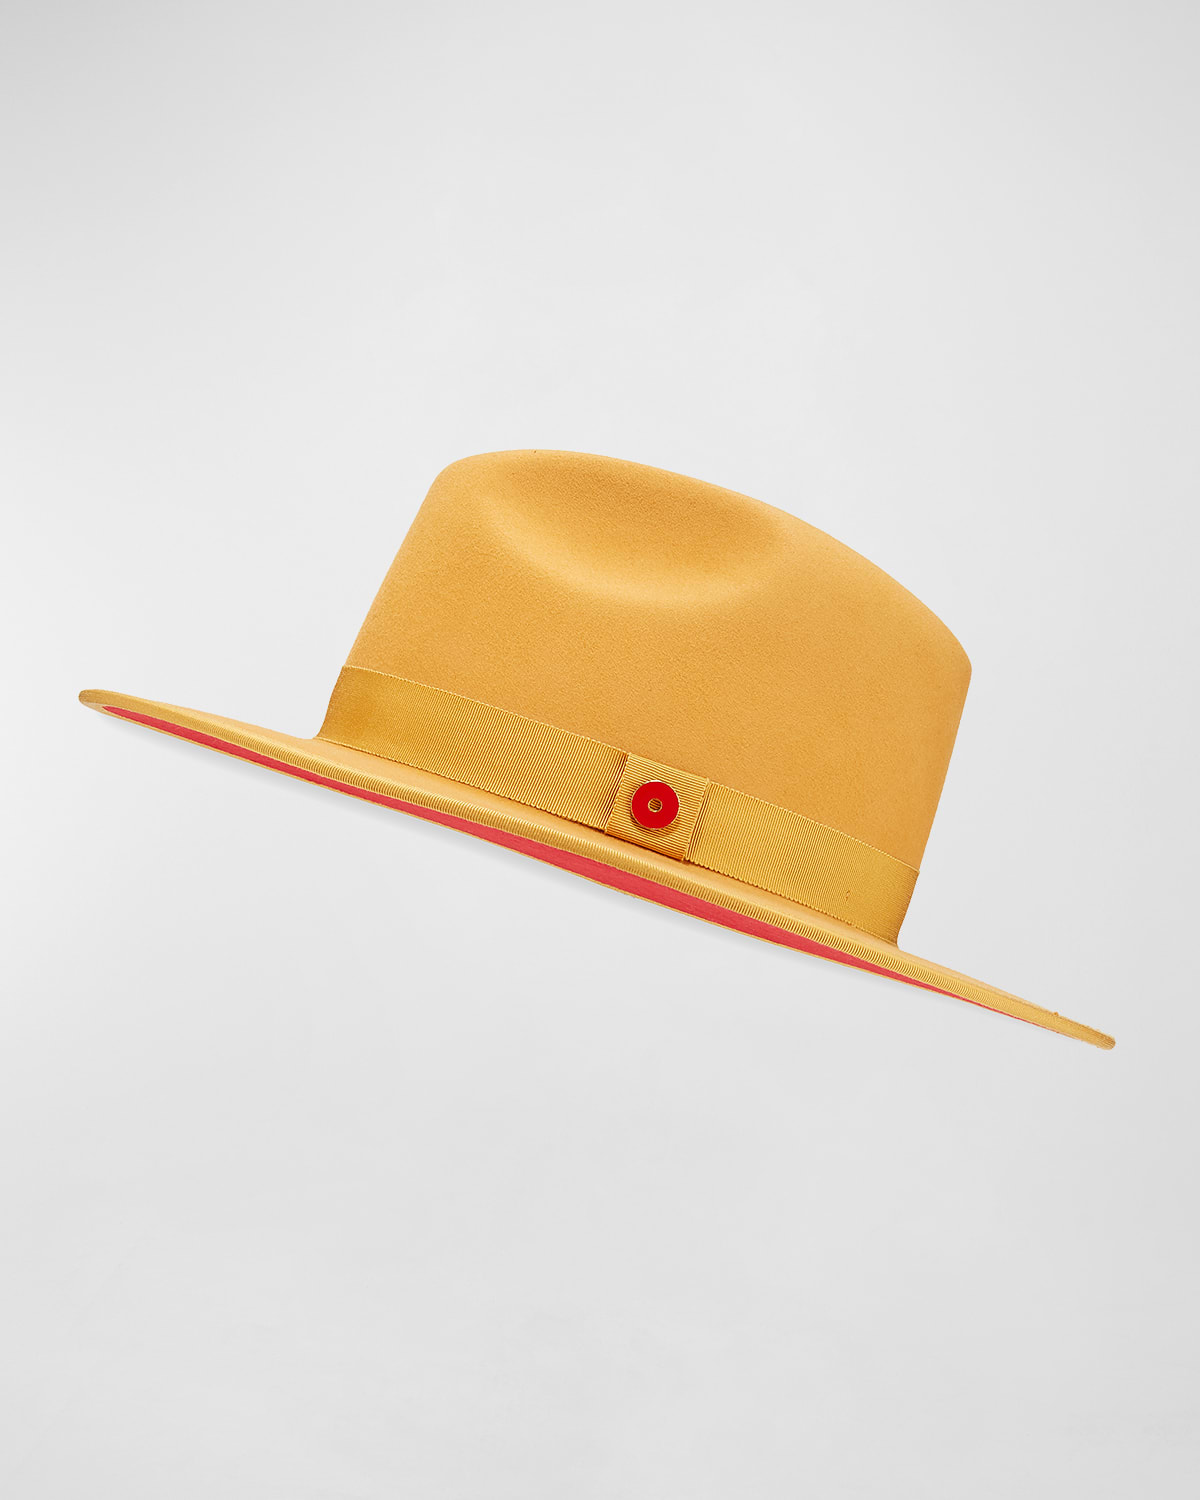 Keith James Queen Red-Brim Wool Fedora Hat, Canary Yellow